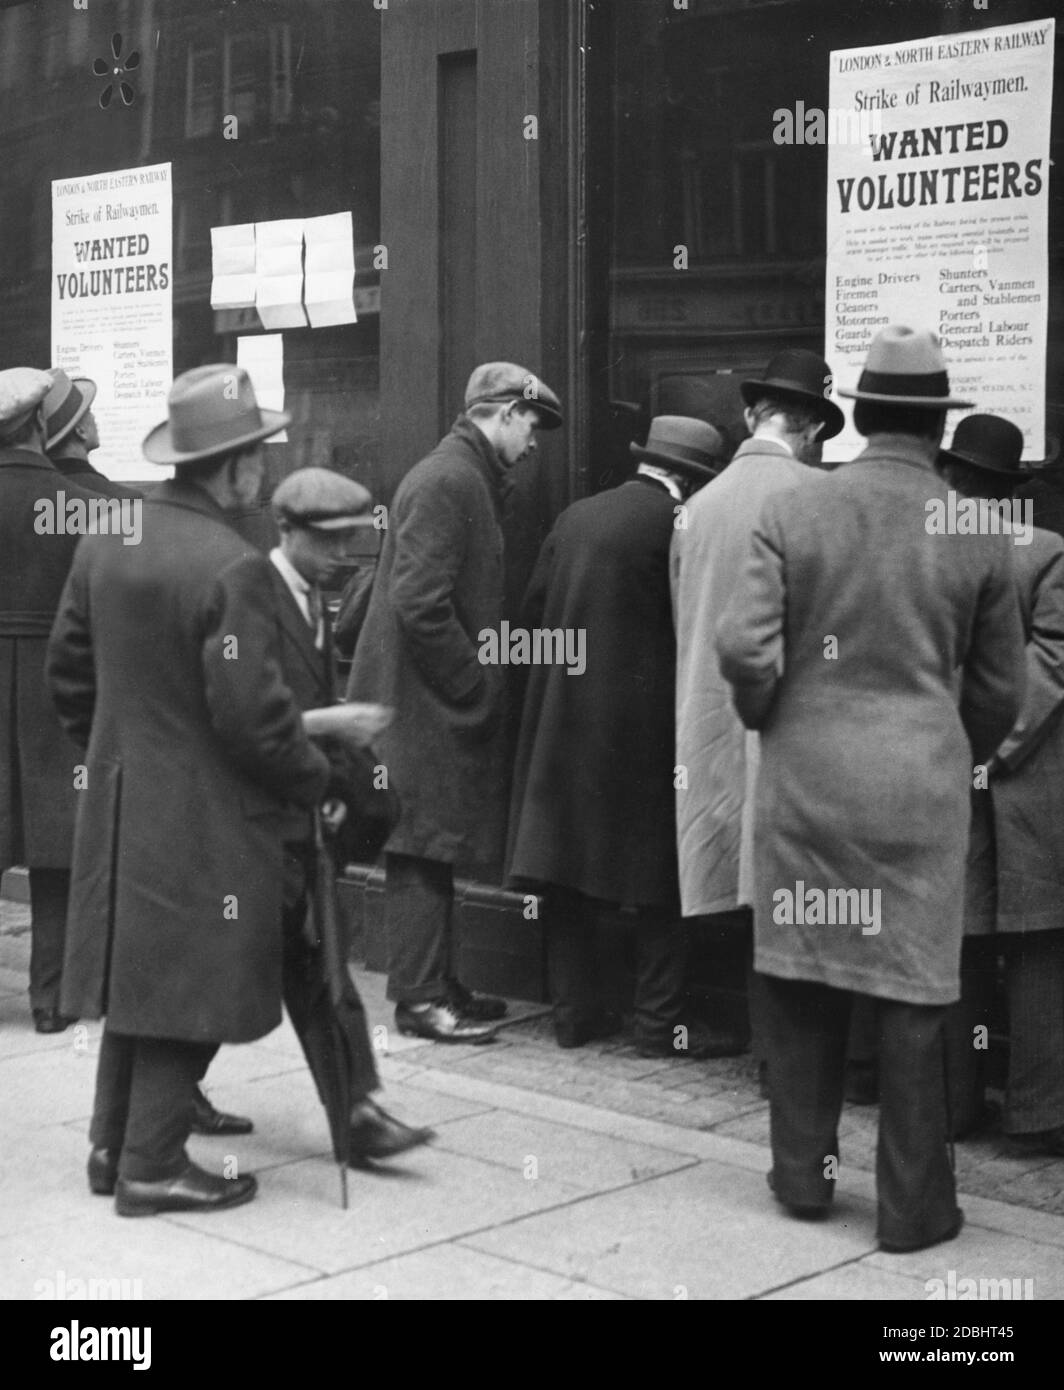 Passers-by stand in front of posters recruiting voluntary workers for the railroad as strike breakers during the London general strike. Stock Photo